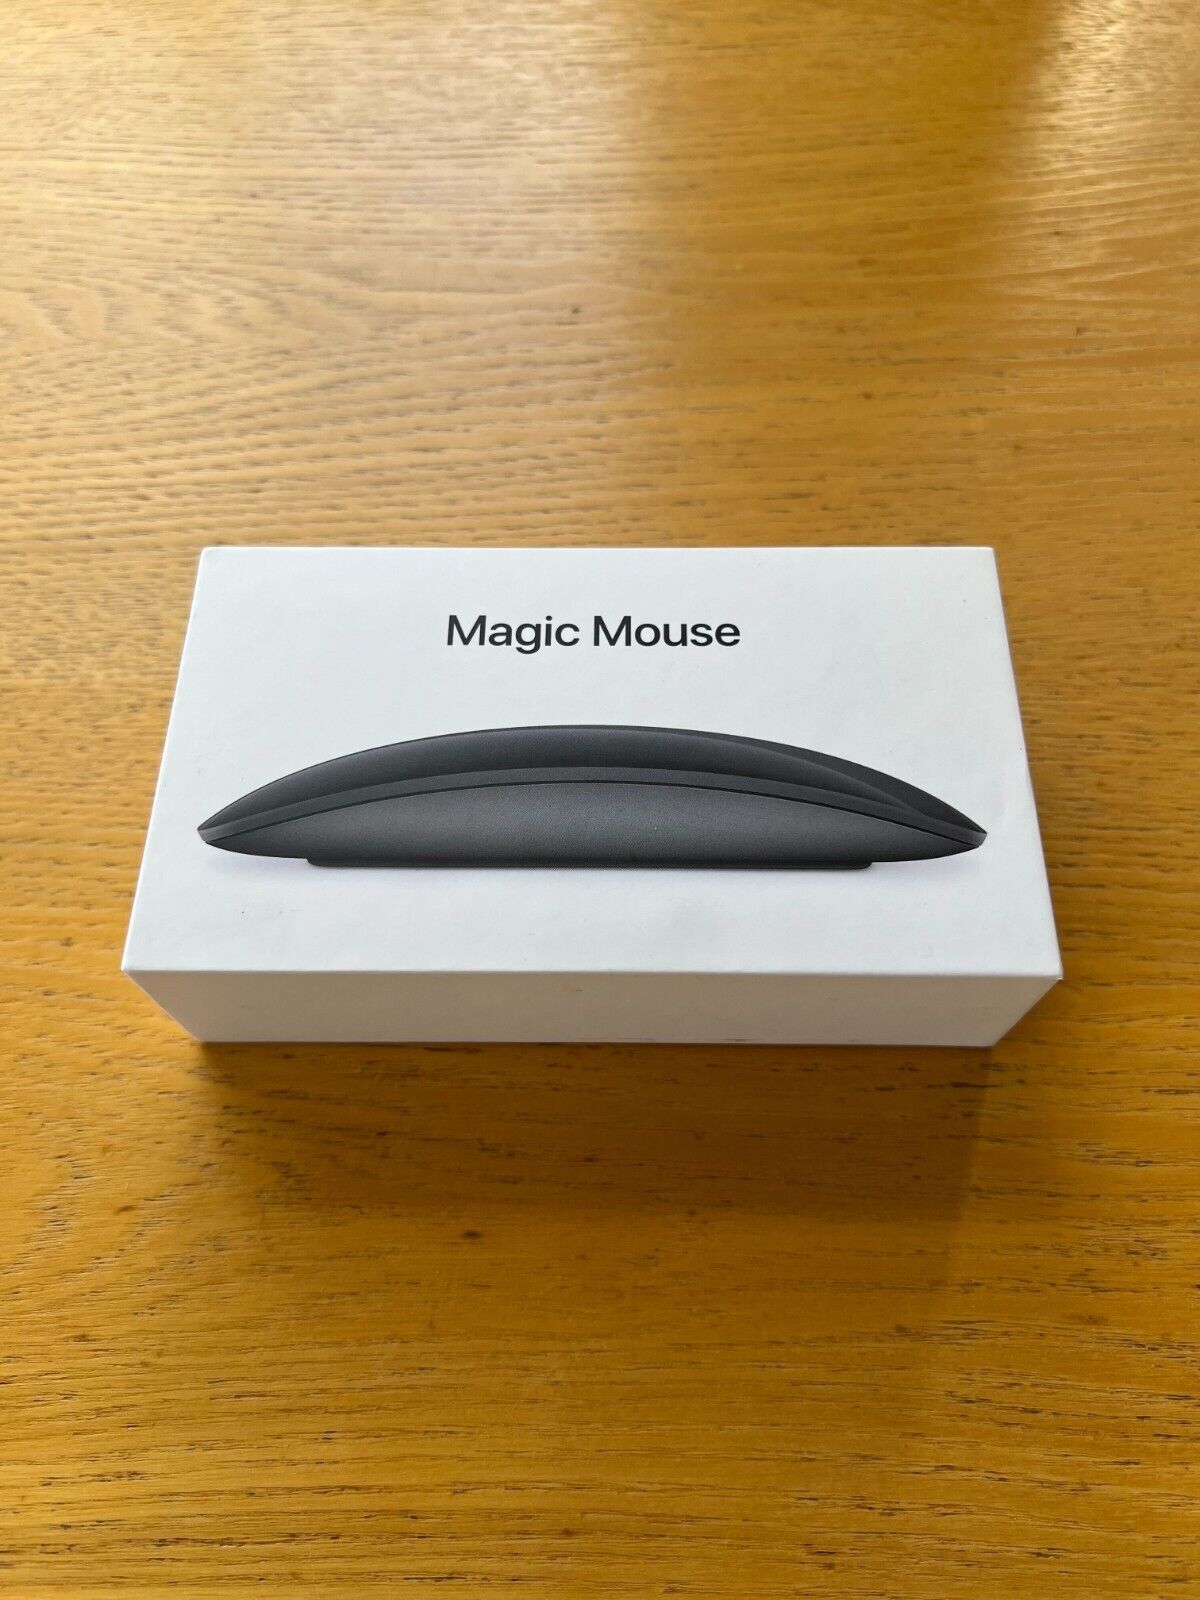 Apple Magic Mouse 2 - Space Gray - MRME2LL/A - Mint Condition